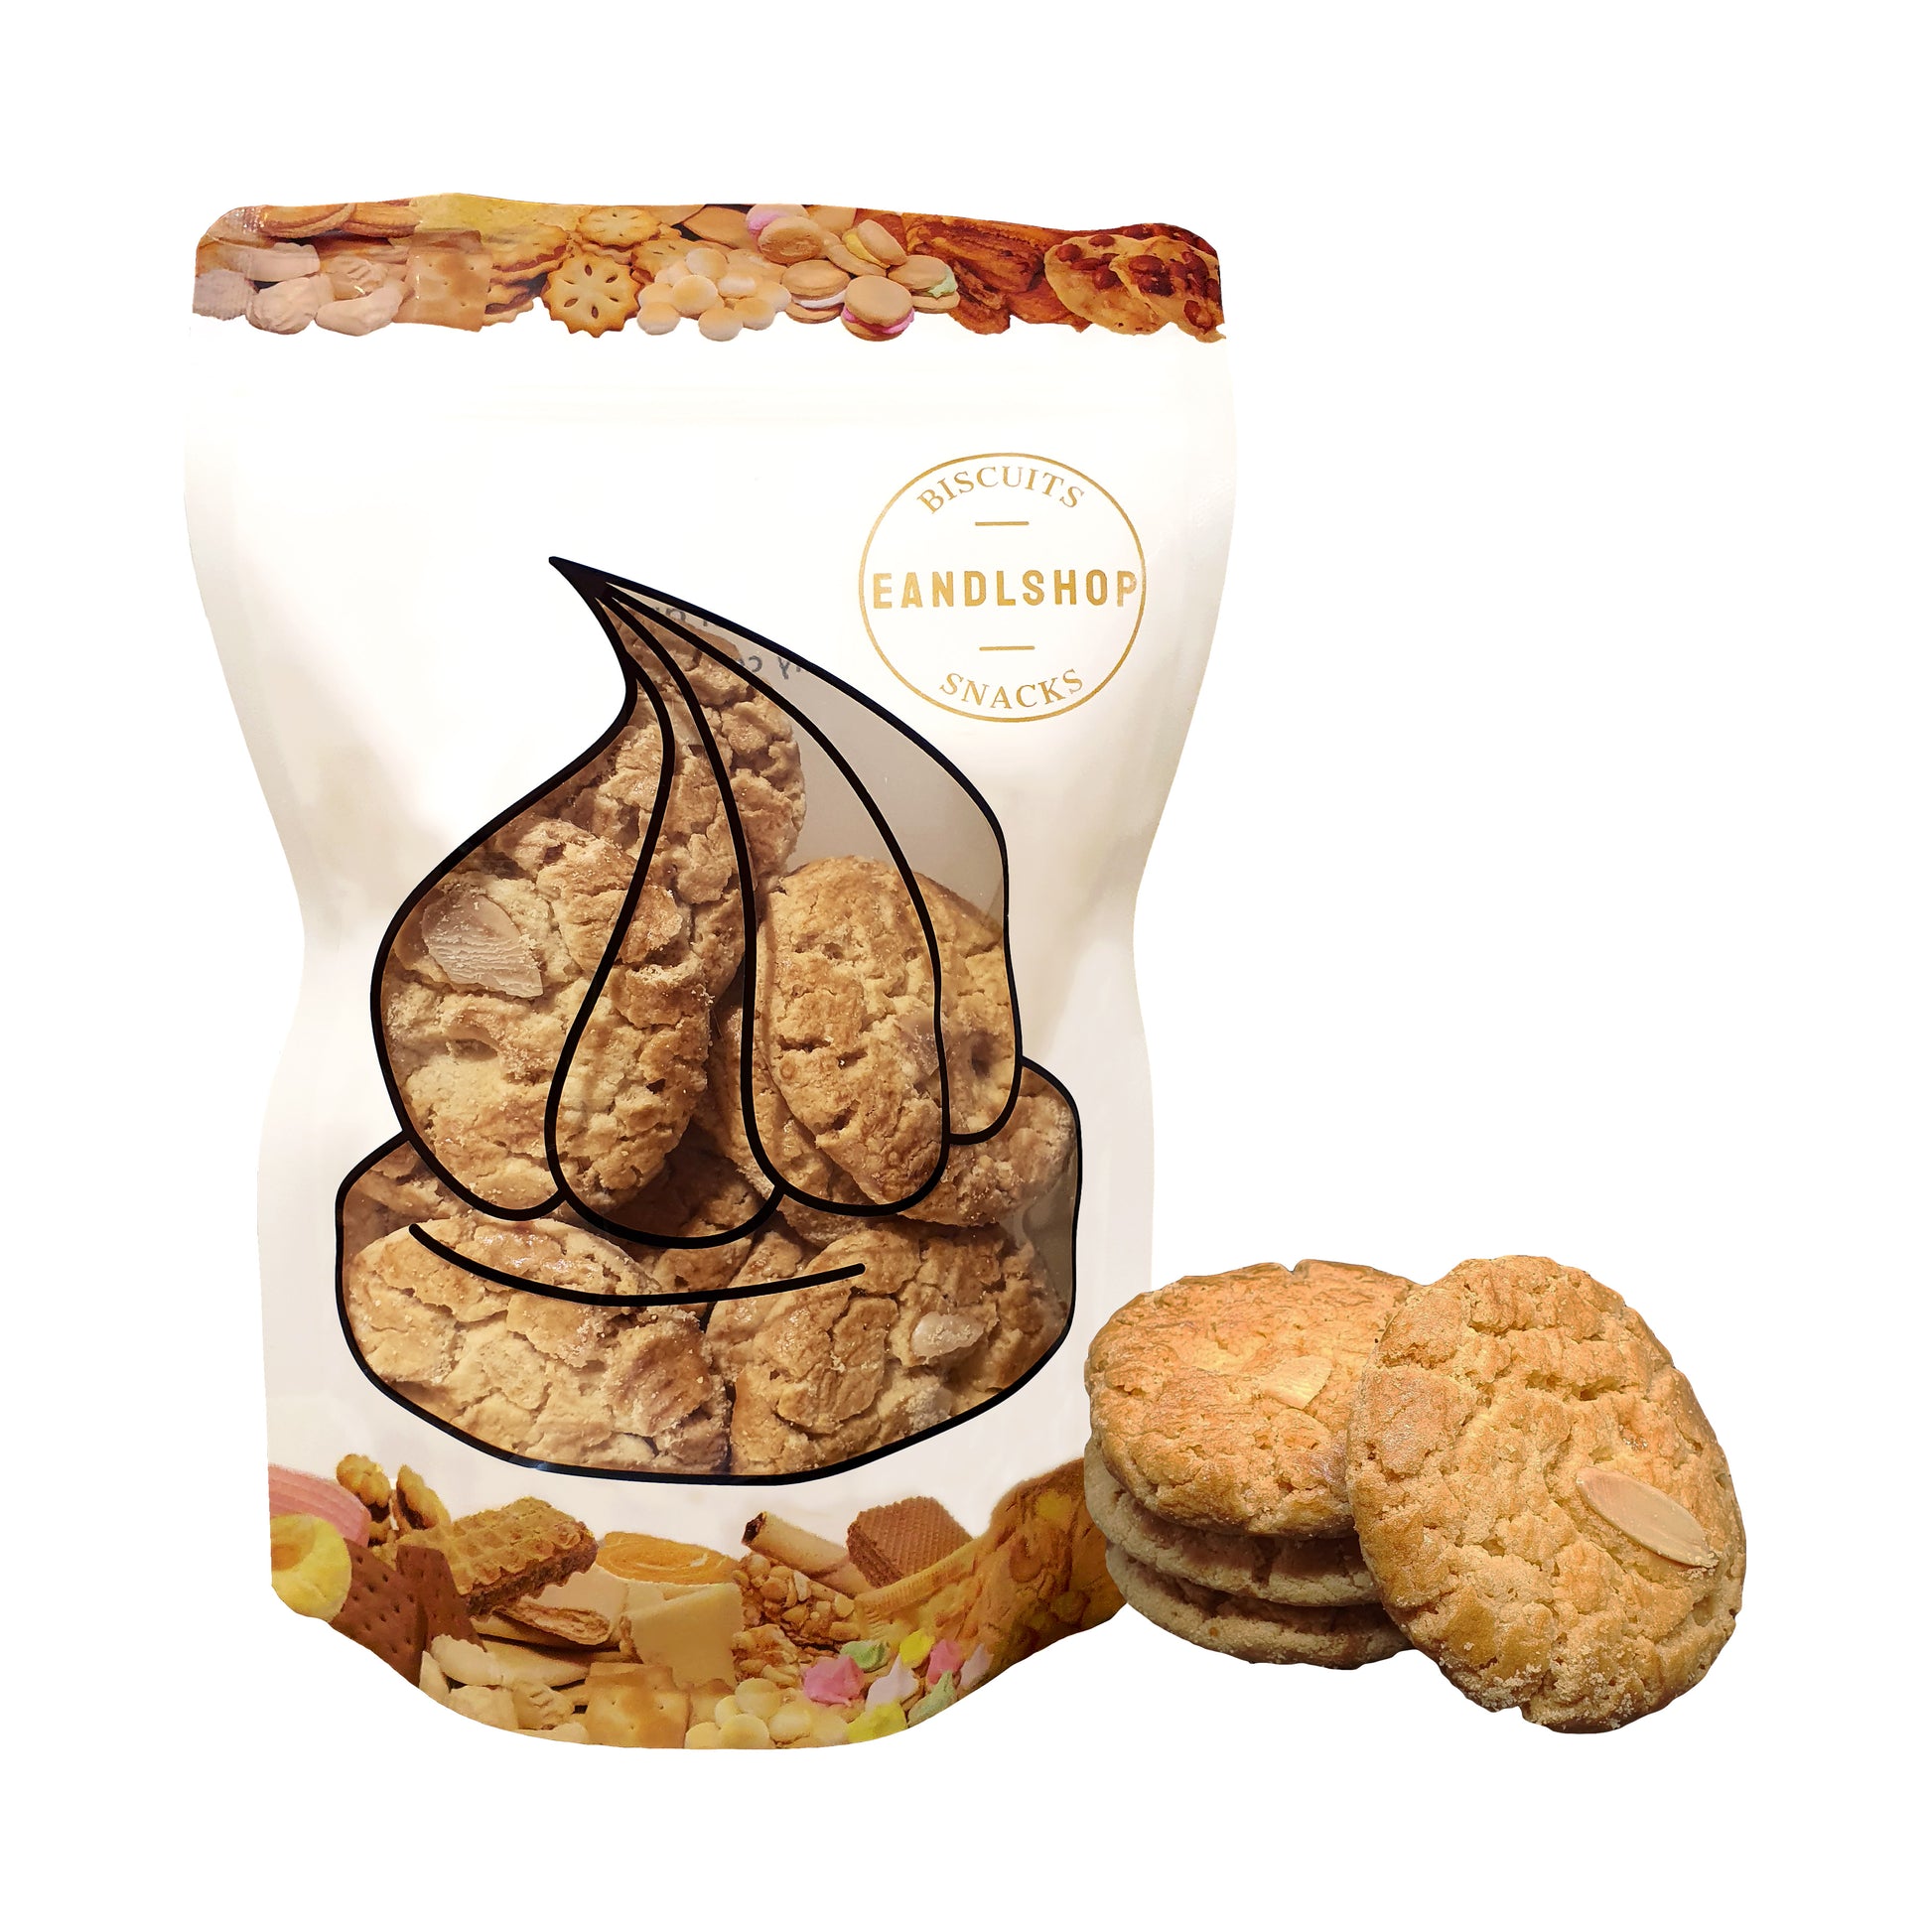 Almond Flake Cookies. Old-school biscuits, modern snacks (chips, crackers), cakes, gummies, plums, dried fruits, nuts, herbal tea – available at www.EANDLSHOP.com